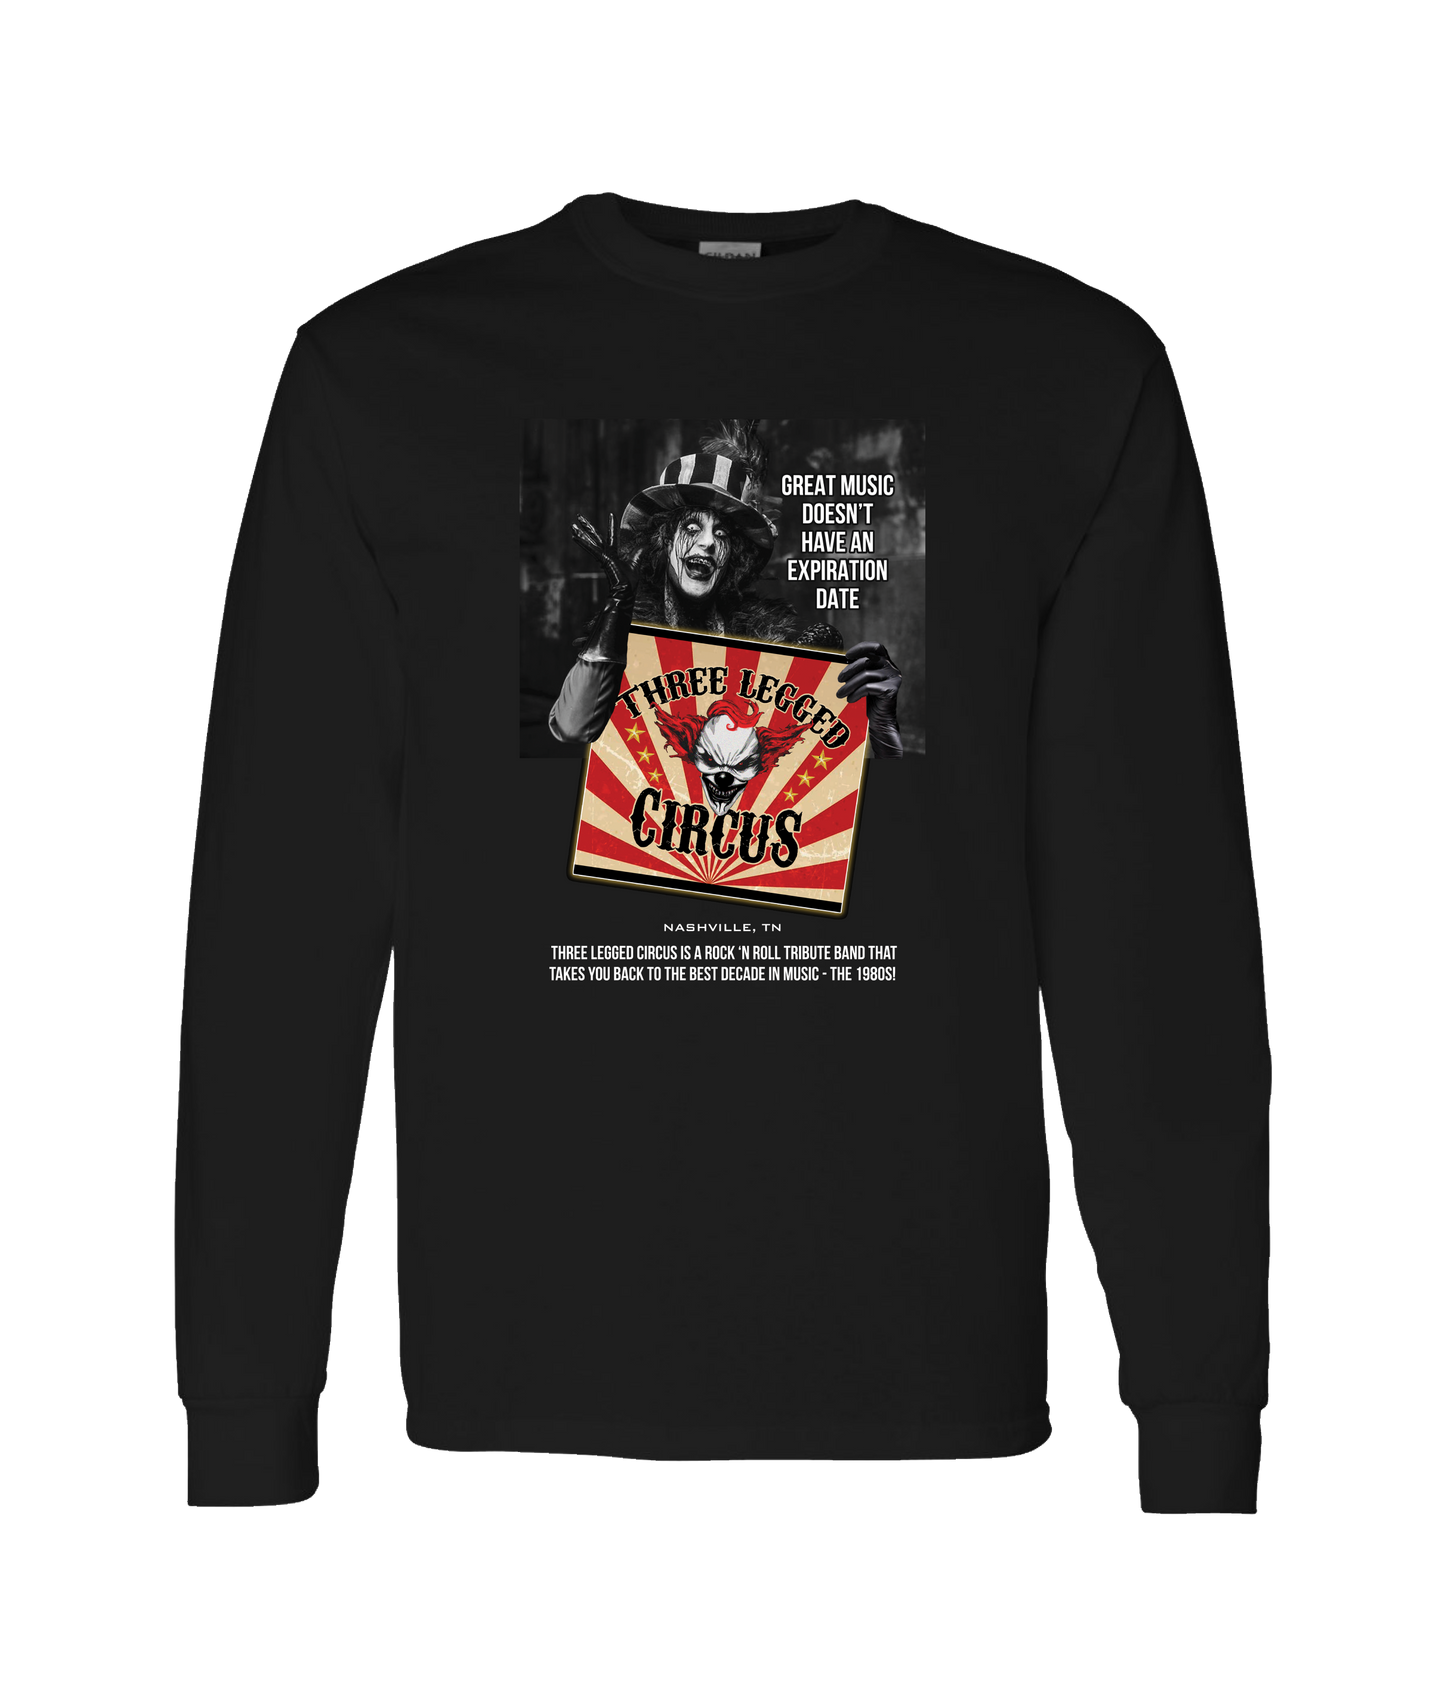 Three Legged Circus - Great Music Doesn't Have an Expiration Date - Black Long Sleeve T